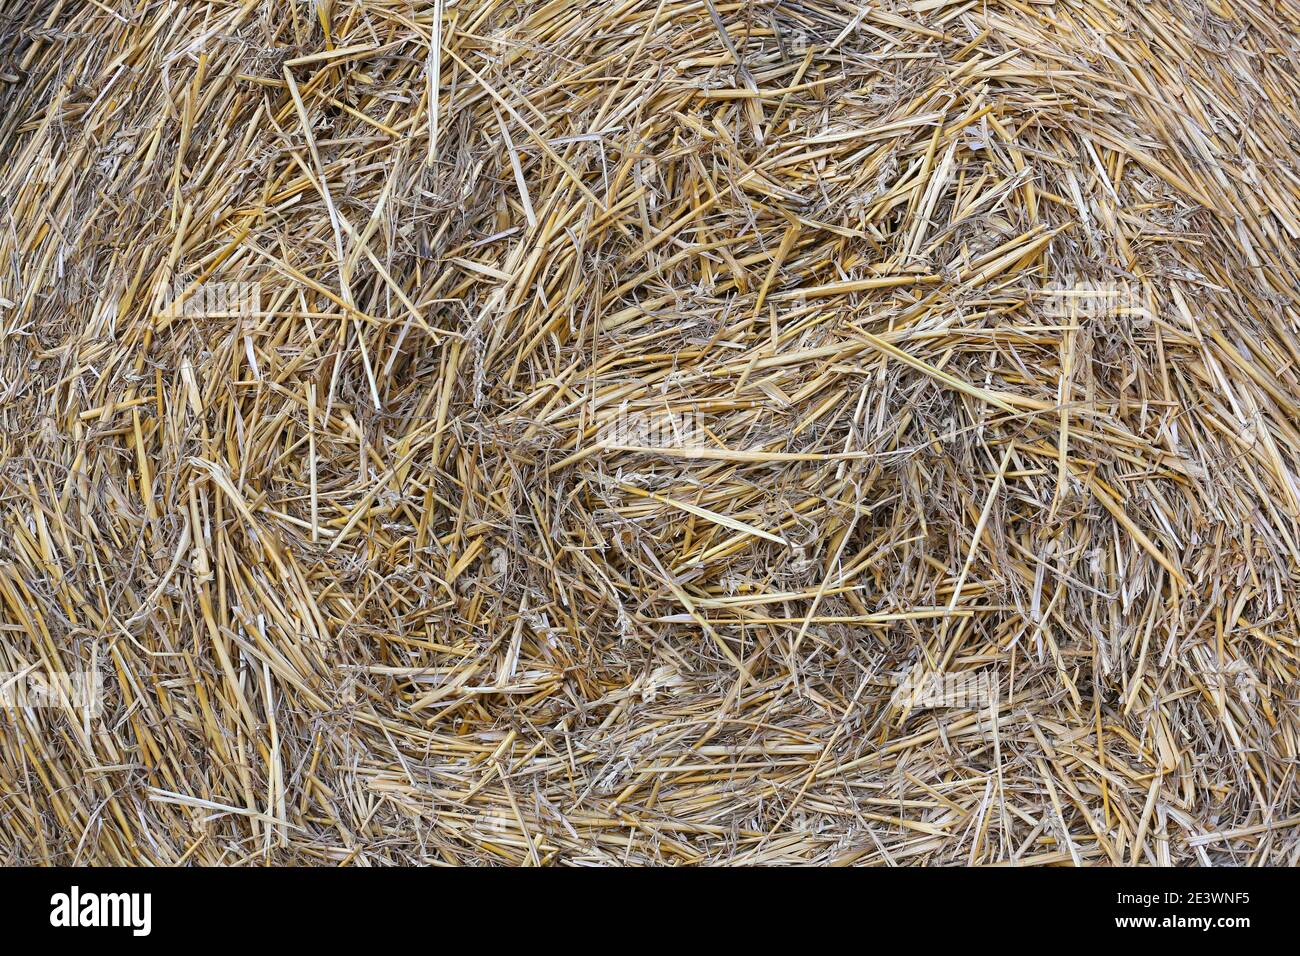 Straw from cereals as a natural background Stock Photo